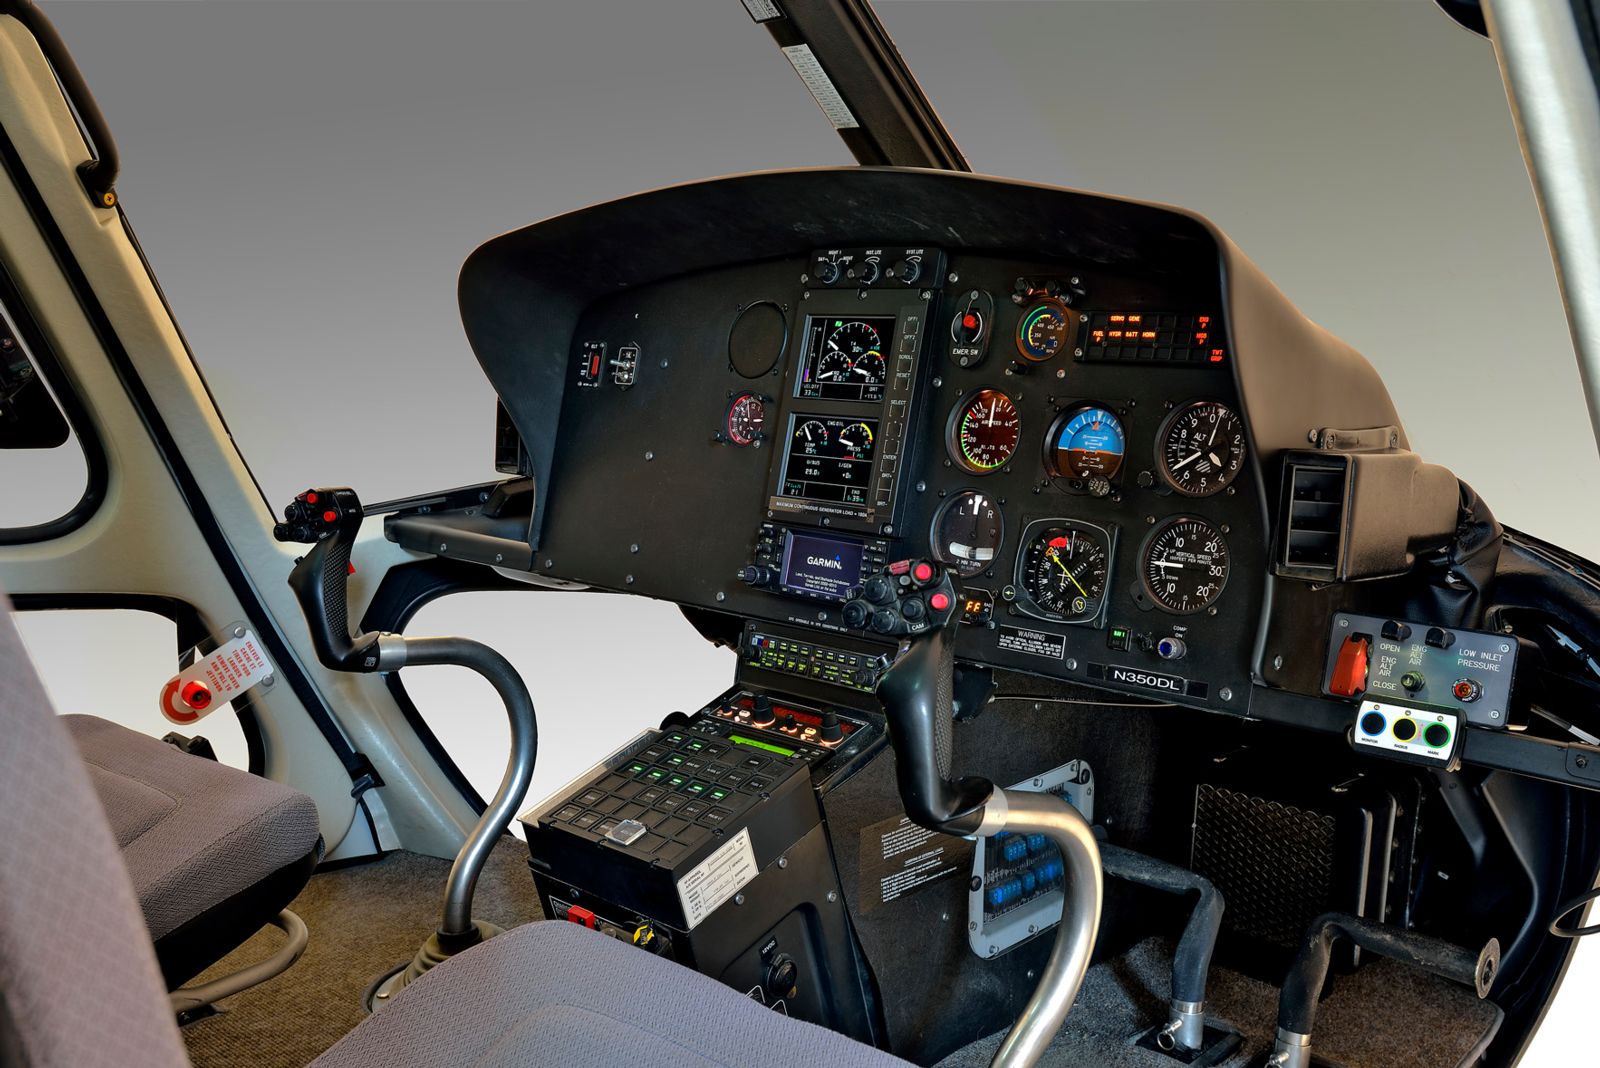 Eurocopter AS350 B3  S/N 4508 for sale | gallery image: /userfiles/images/Eurocopter_AS350B3_sn4508/cptc_072.jpg